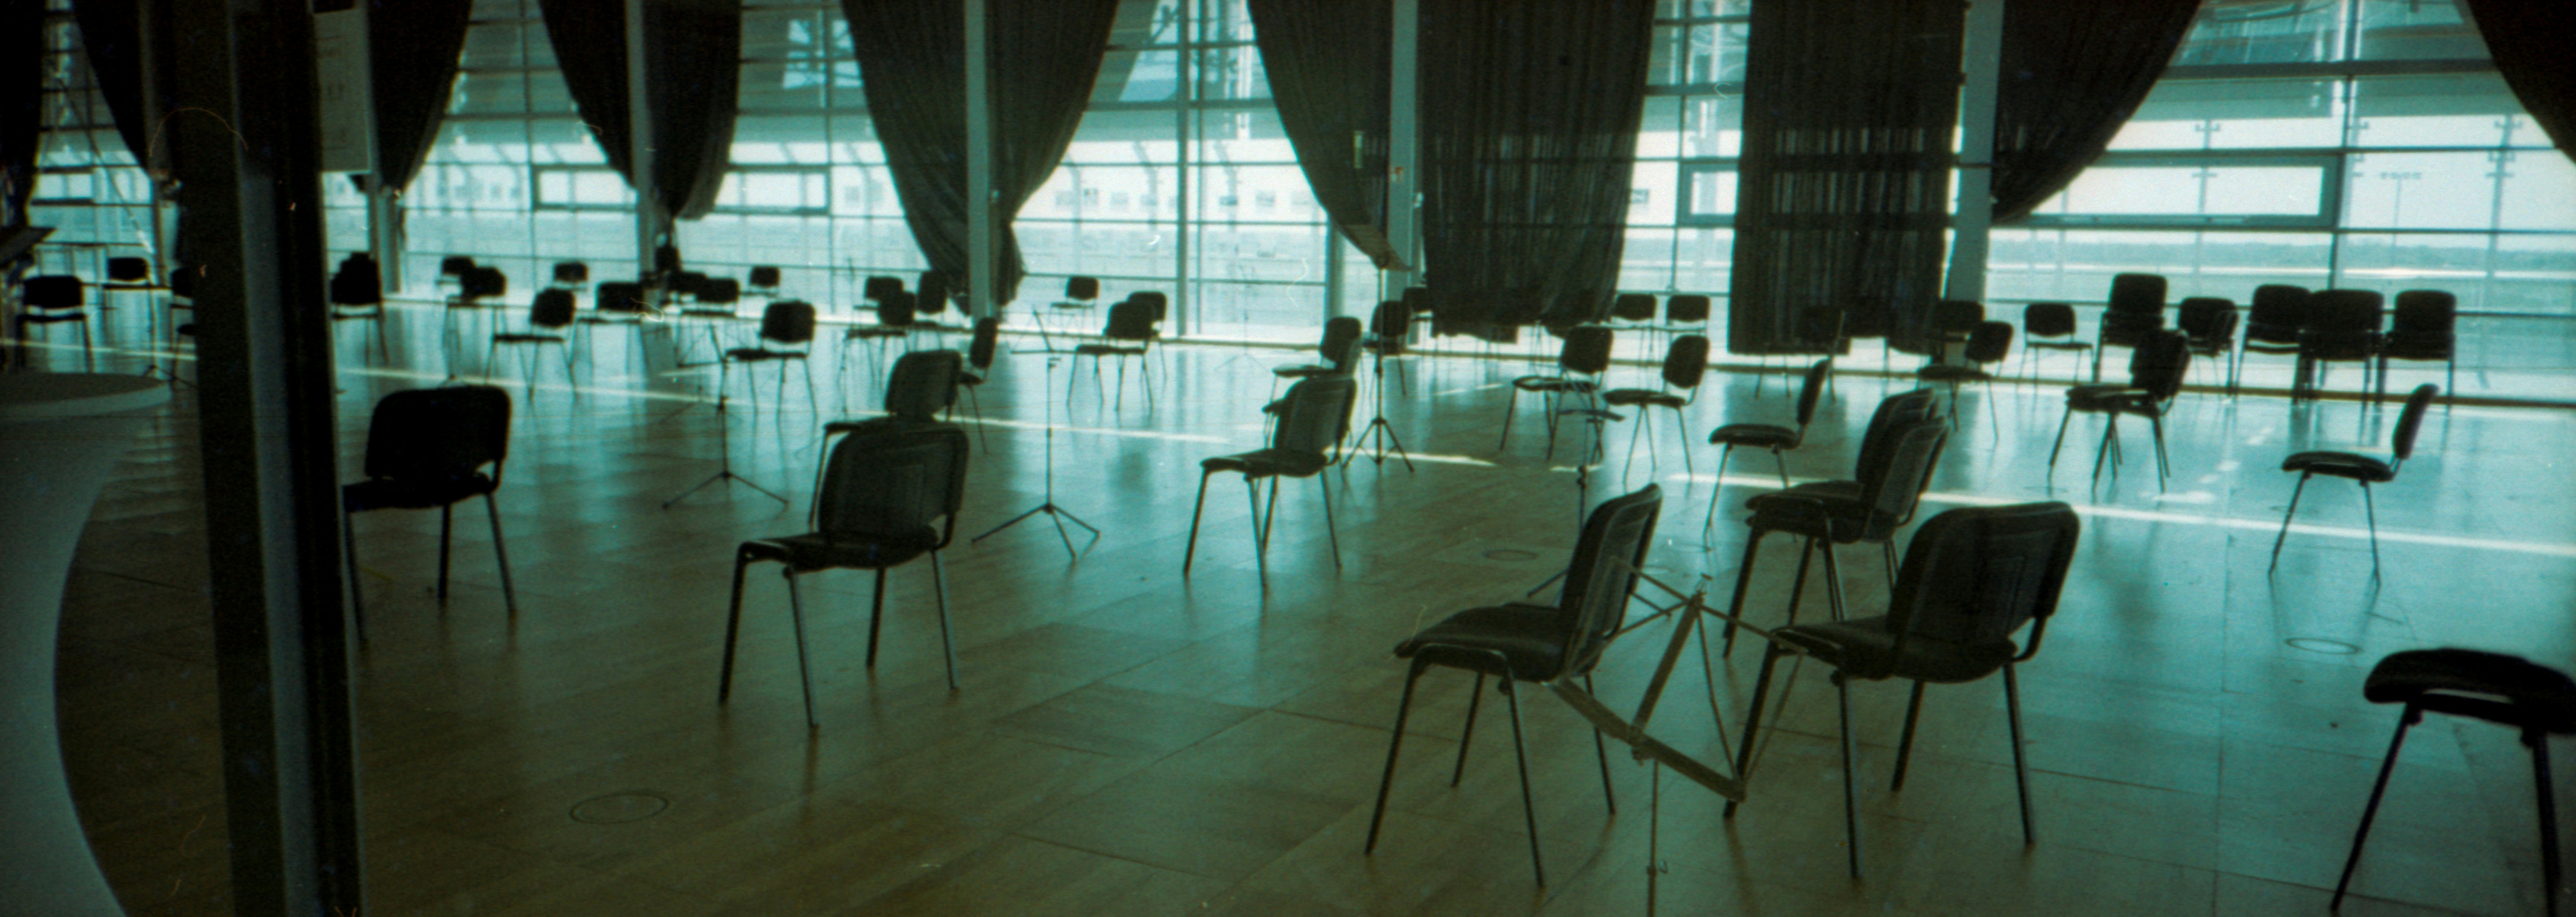 black chairs and table near window